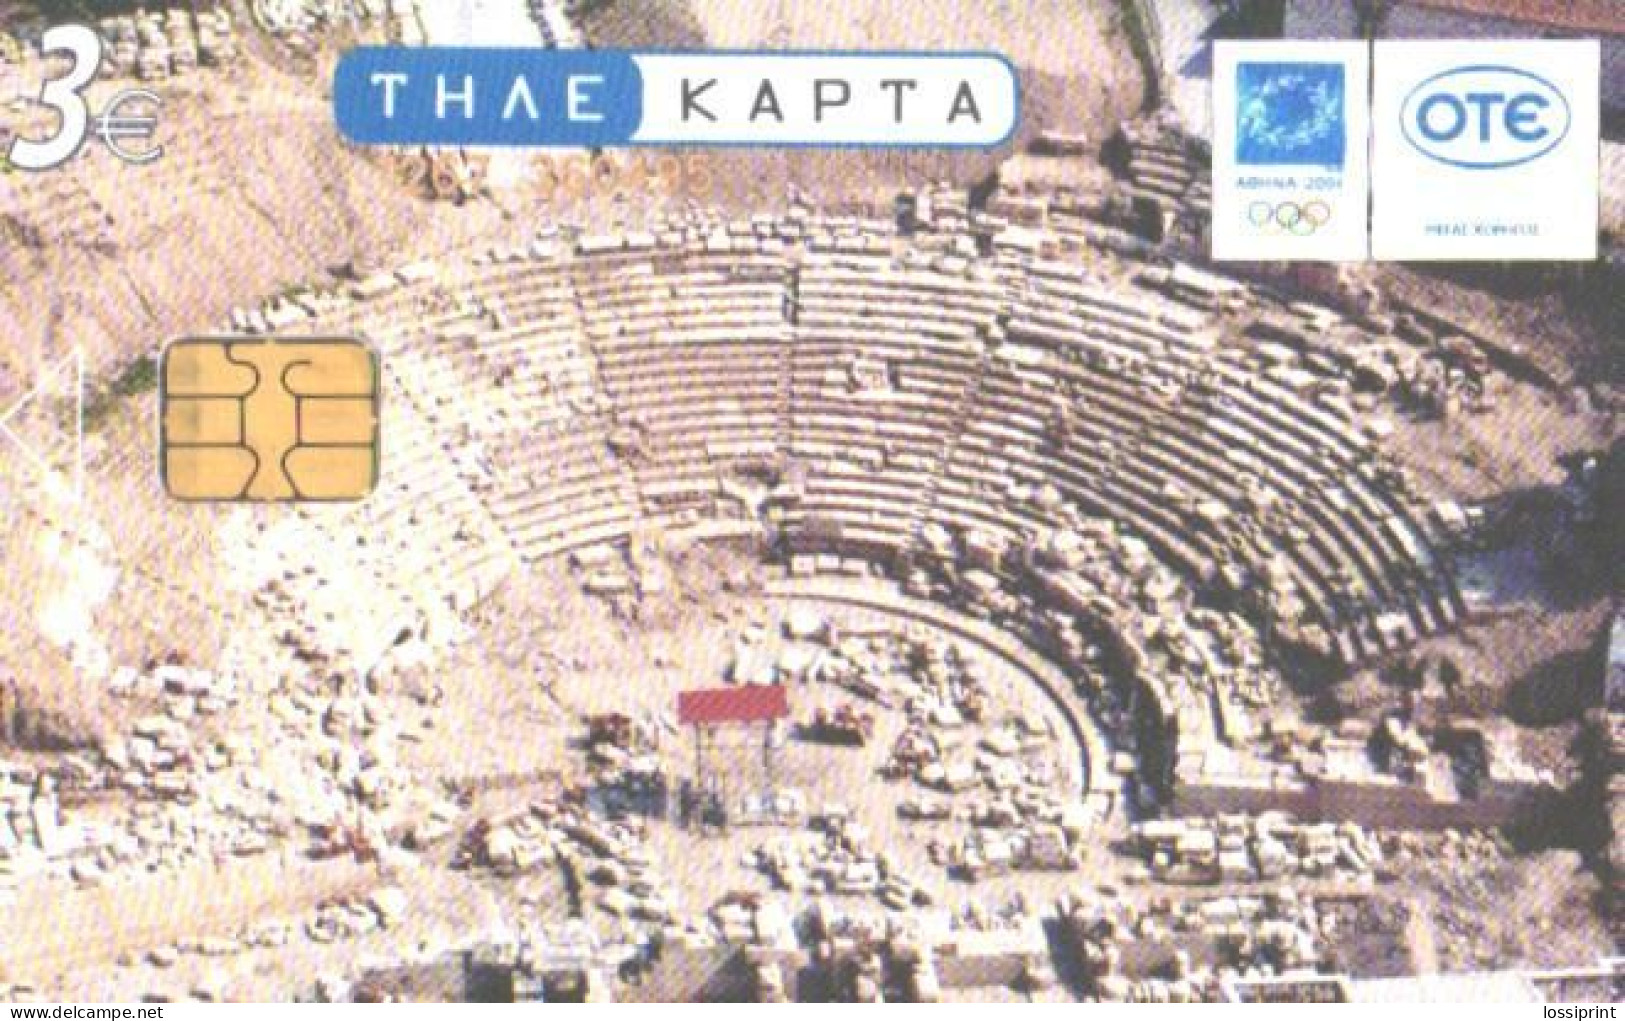 Greece:Used Phonecard, OTE, 3 EUR, Athens Olympic Games 2004, Old Theatre, 2003 - Griechenland